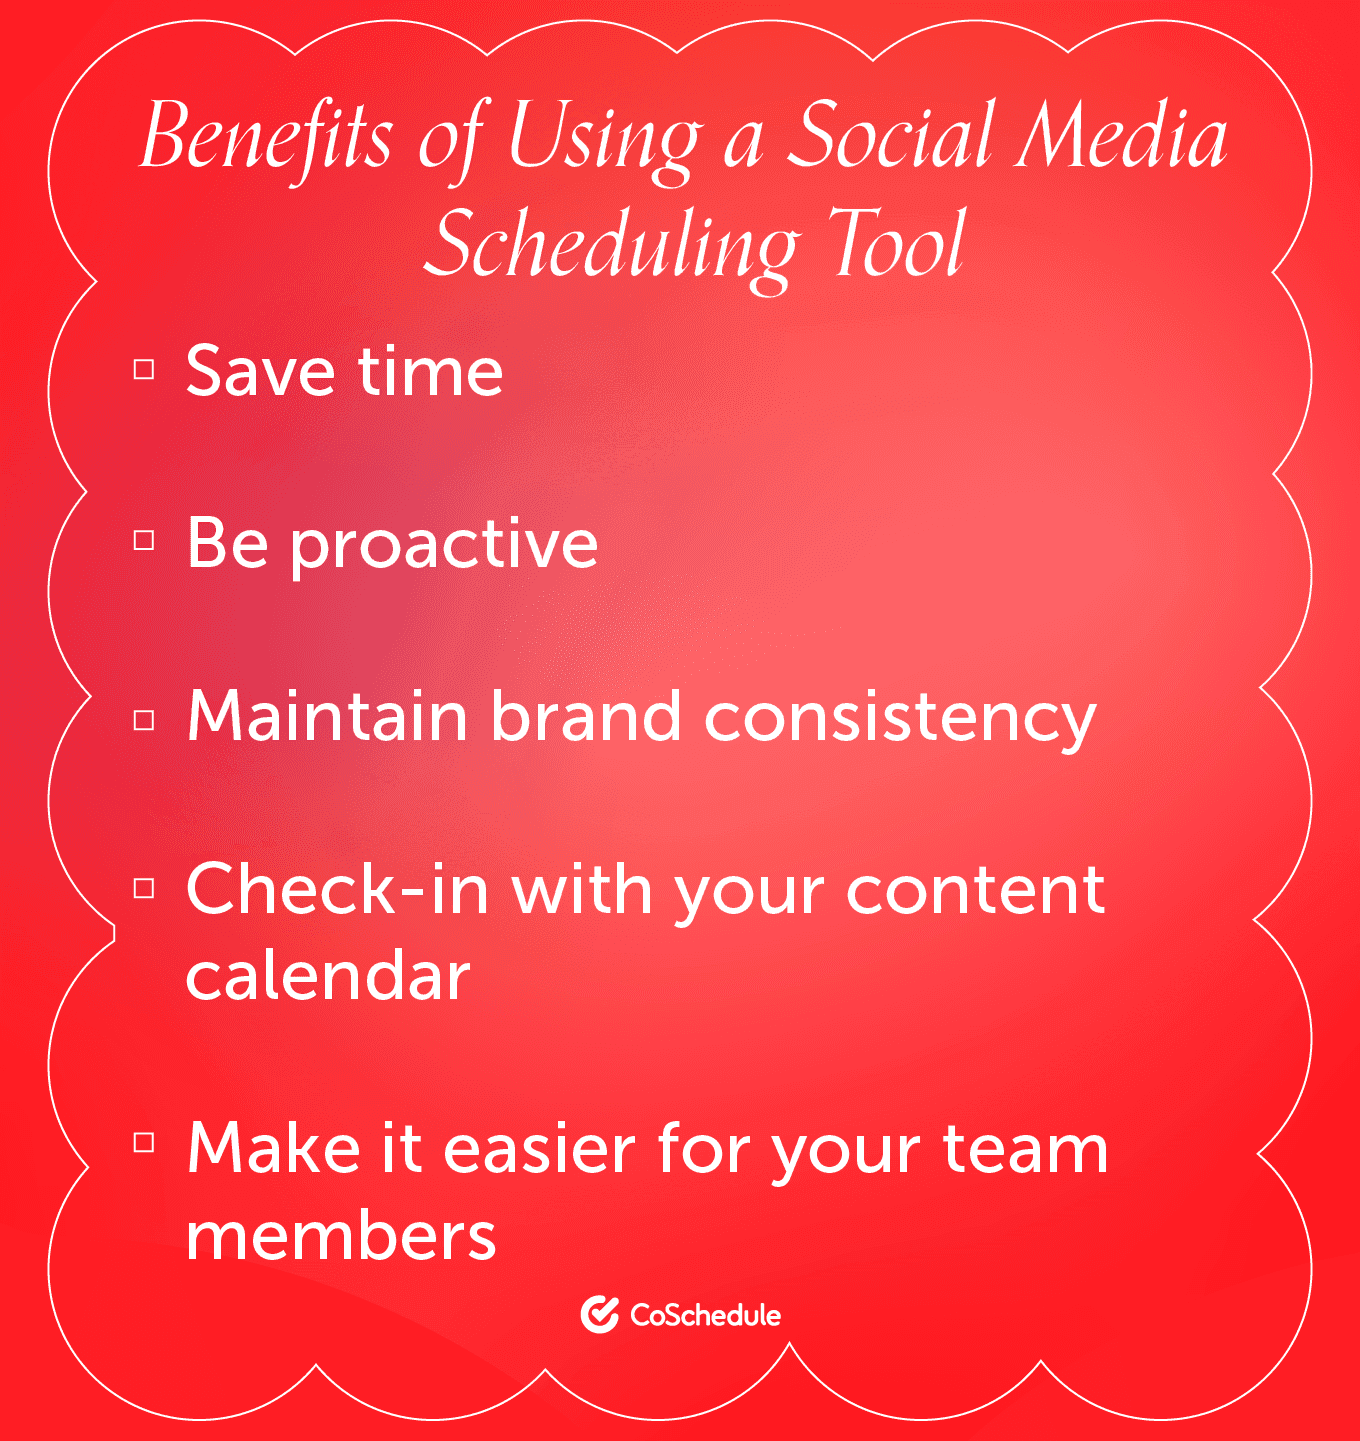 Benefits of using social media scheduling tools